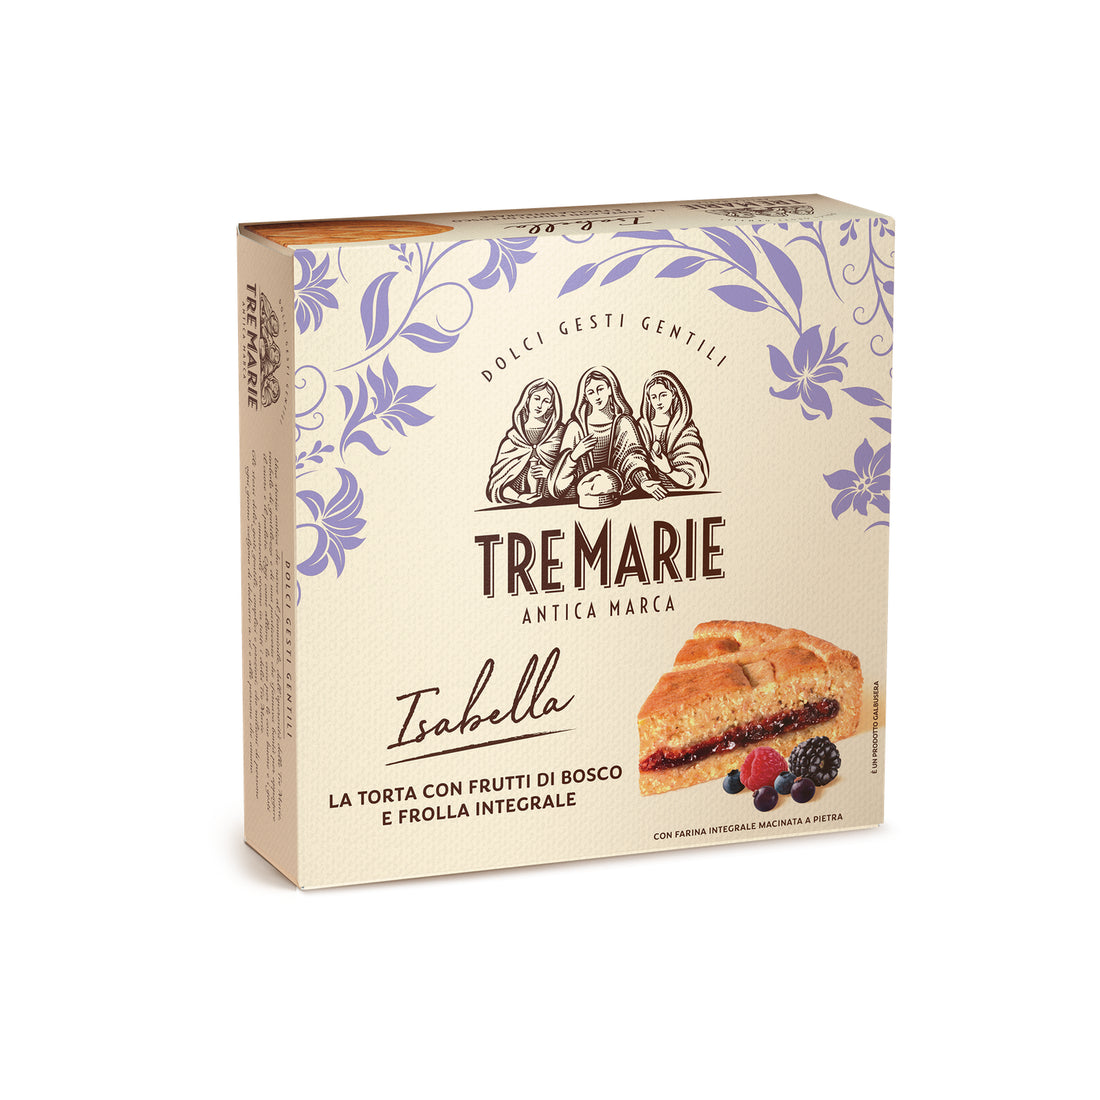 Ancora Uno Biscuits With Pastry Old Style Tre Marie – Dolci Ricorrenze